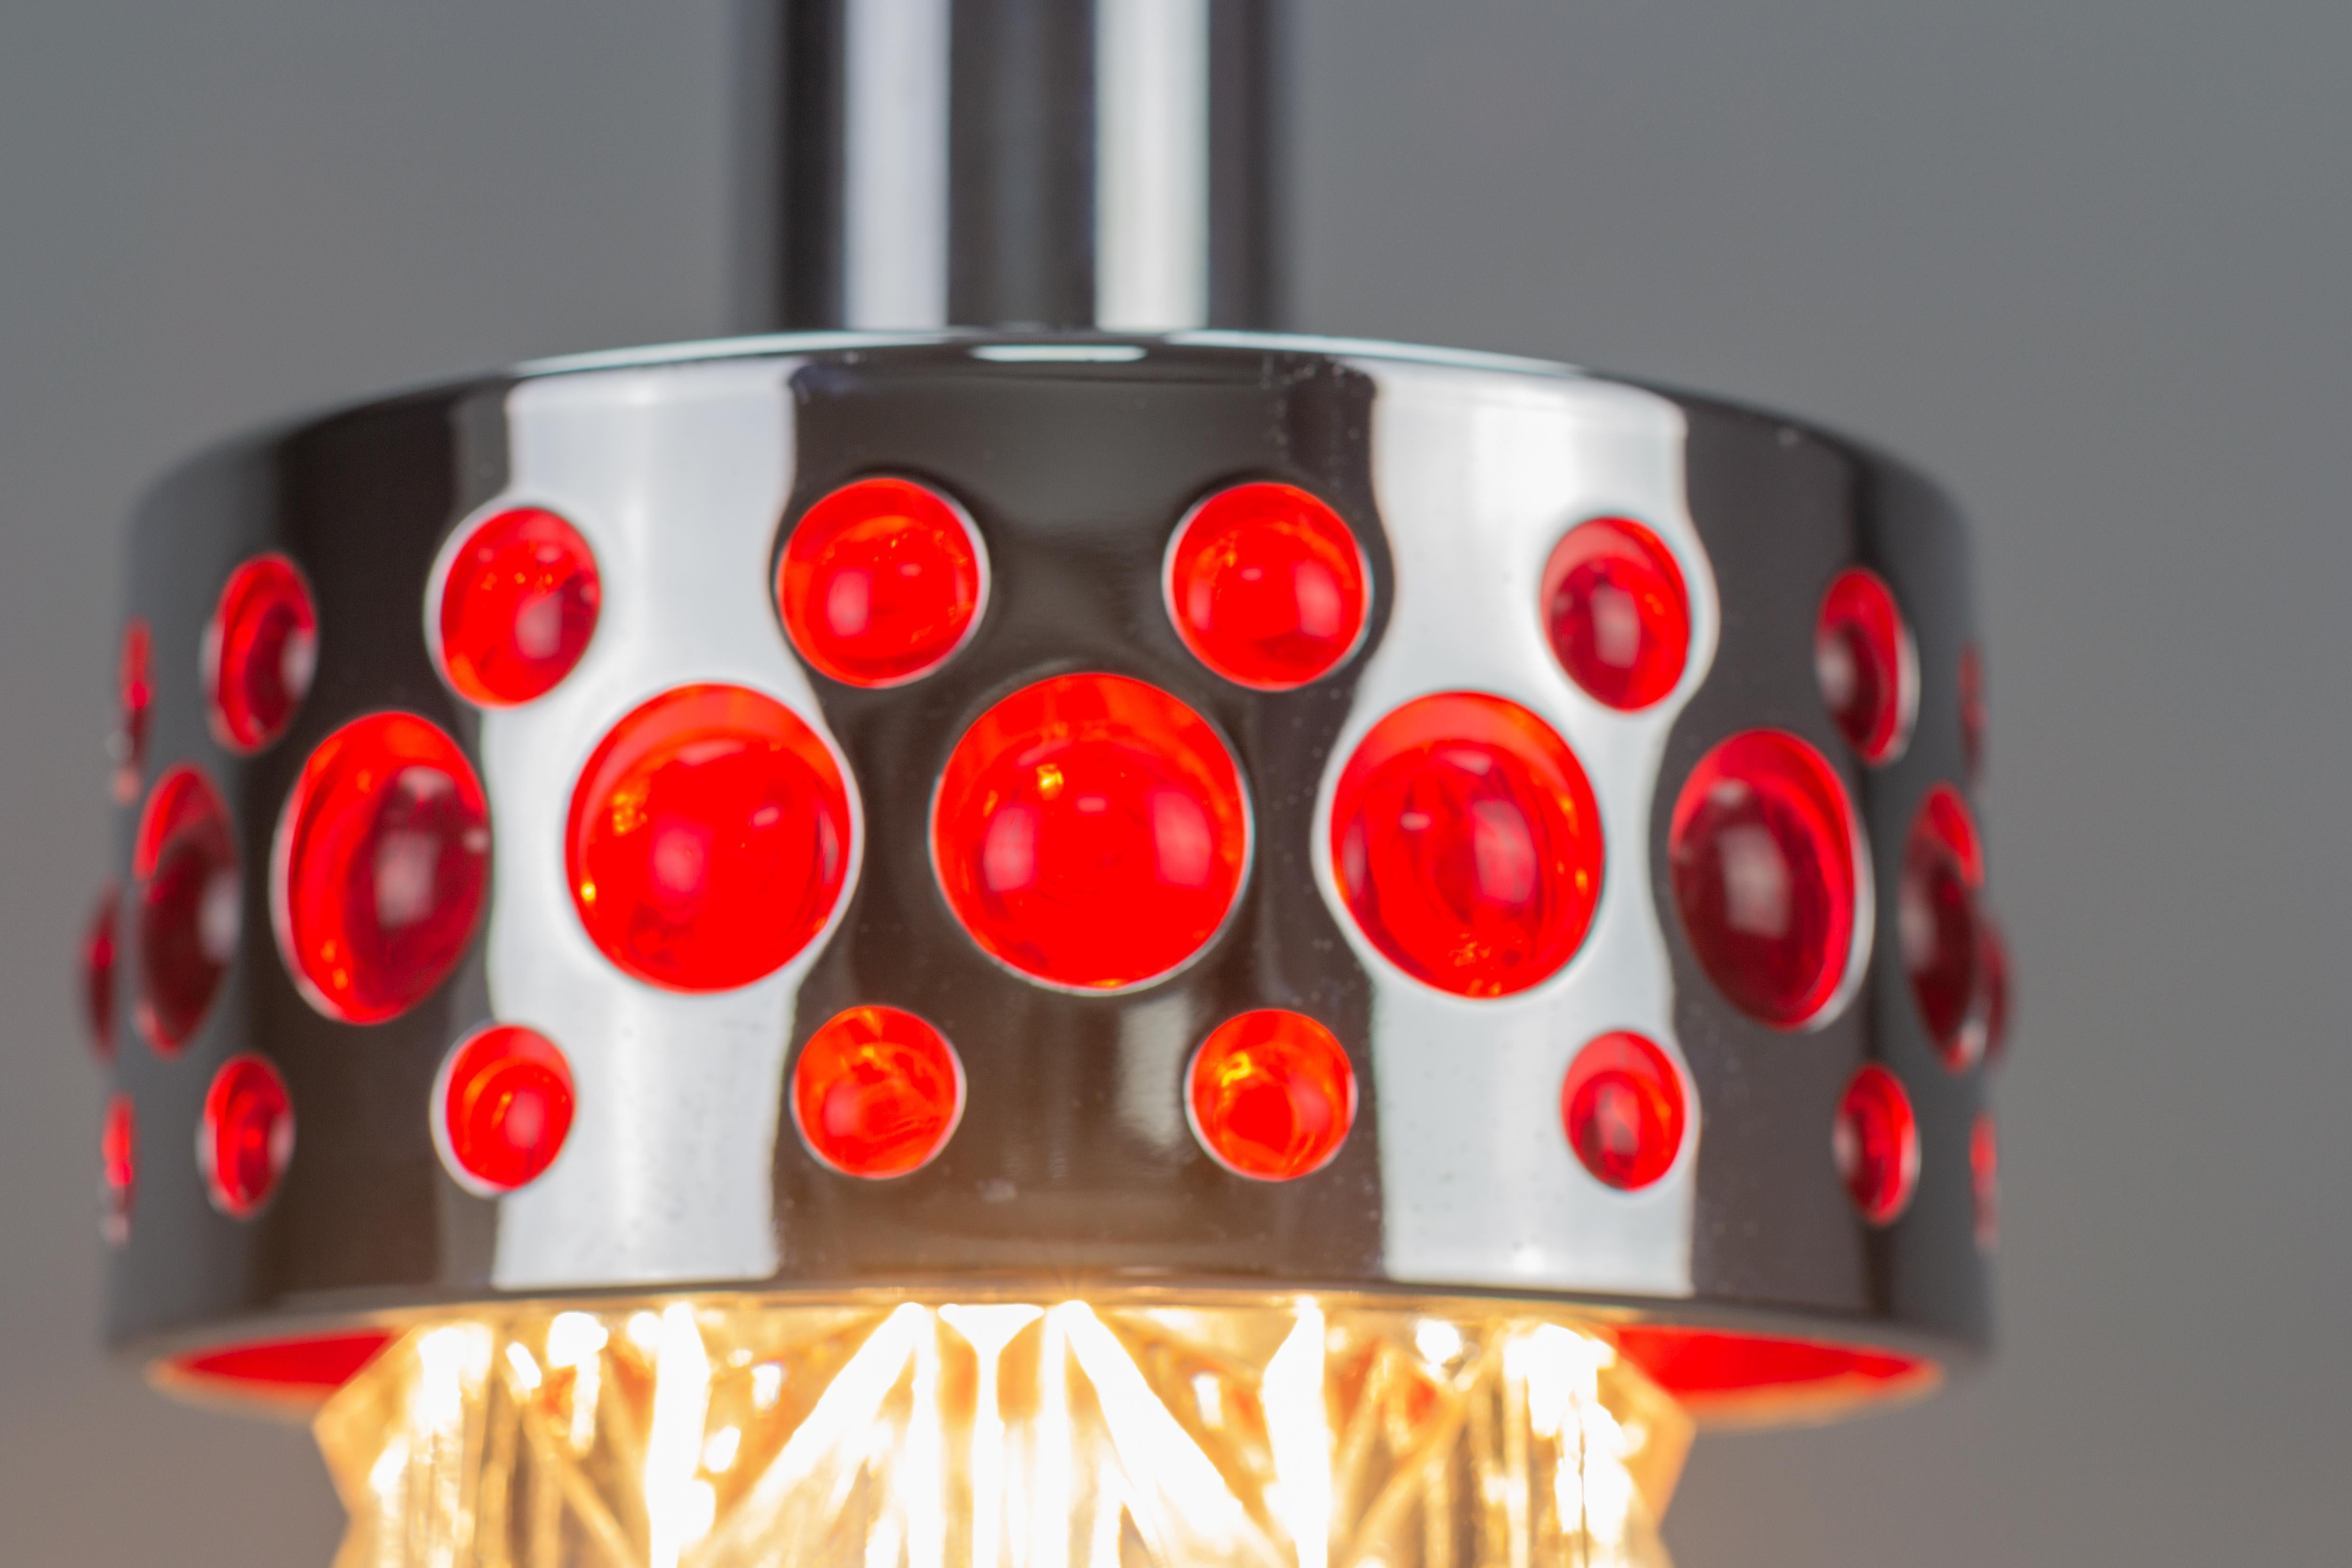 German Mid-Century Modern Chrome and Red Pendant Light by Richard Essig, 1970s In Good Condition For Sale In Barntrup, DE